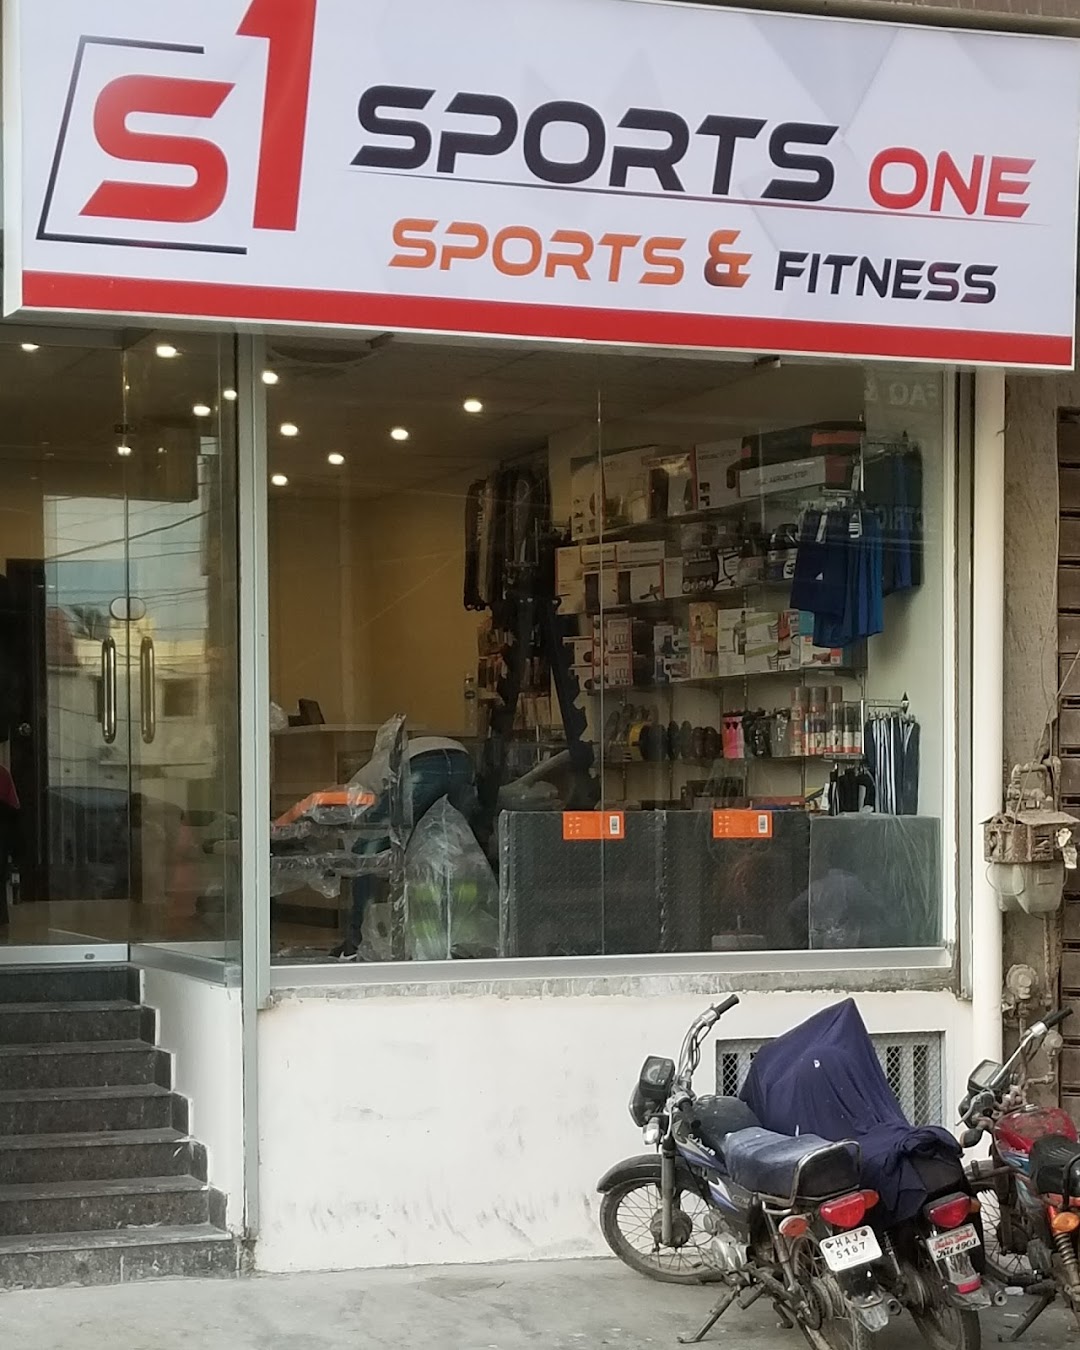 SPORTS ONE